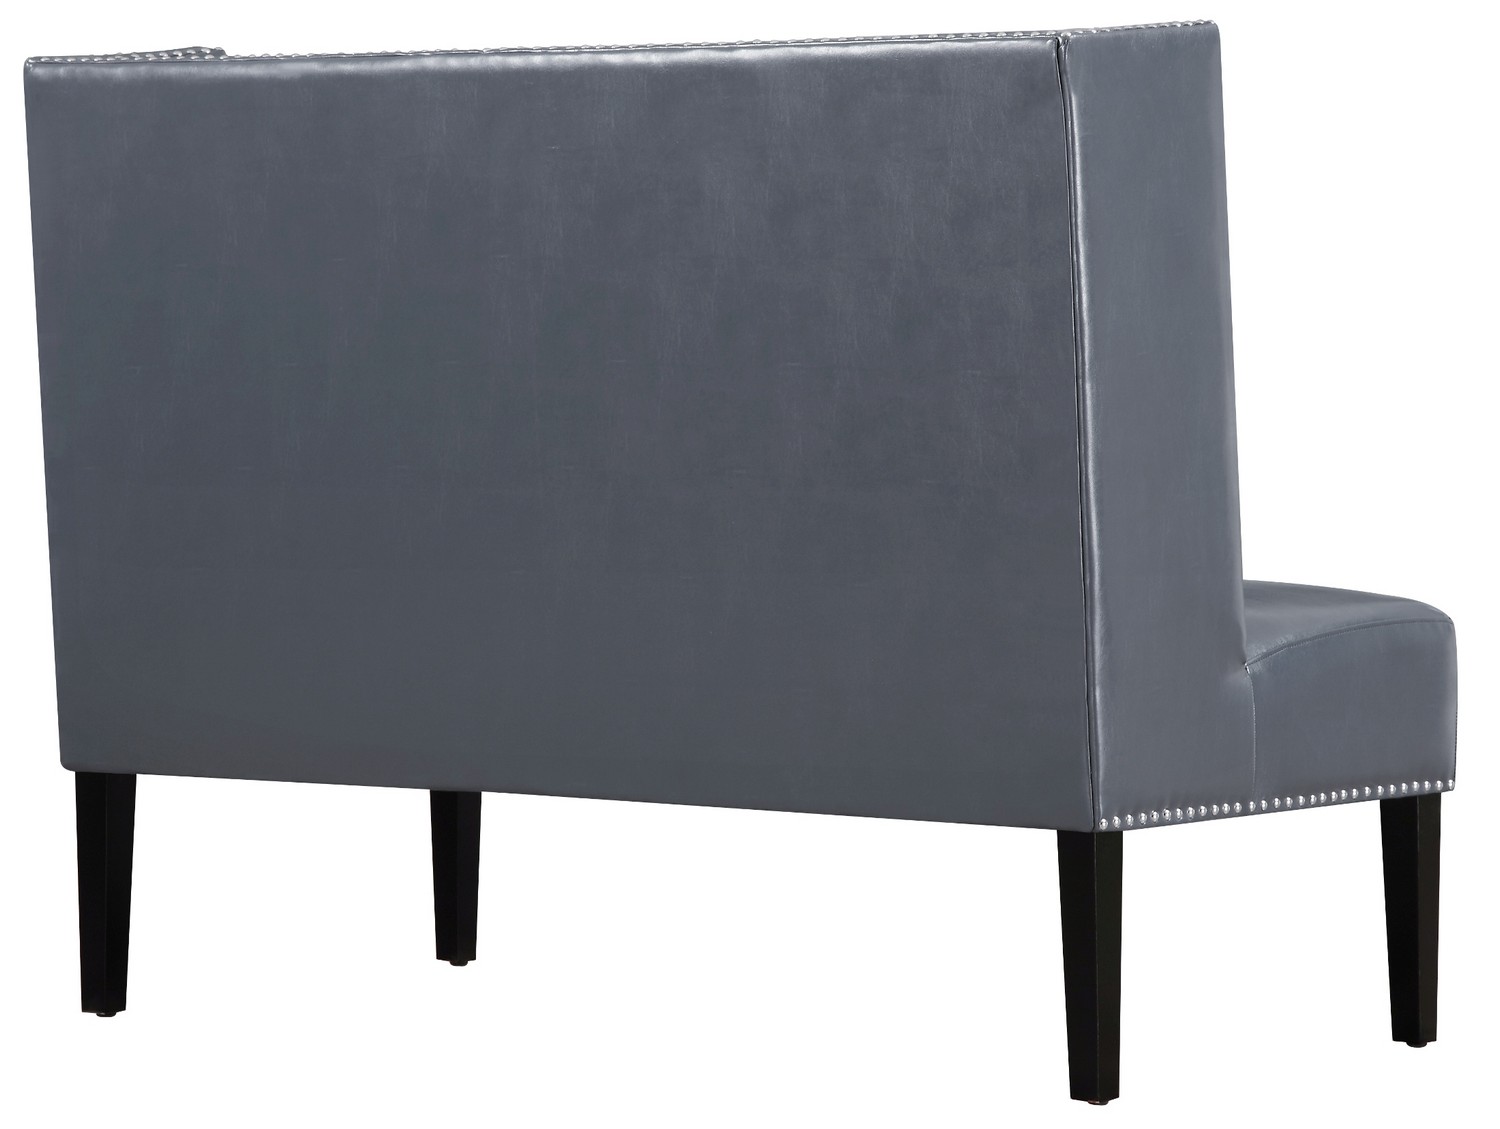 TOV Furniture Halifax Grey Leather Banquette Bench